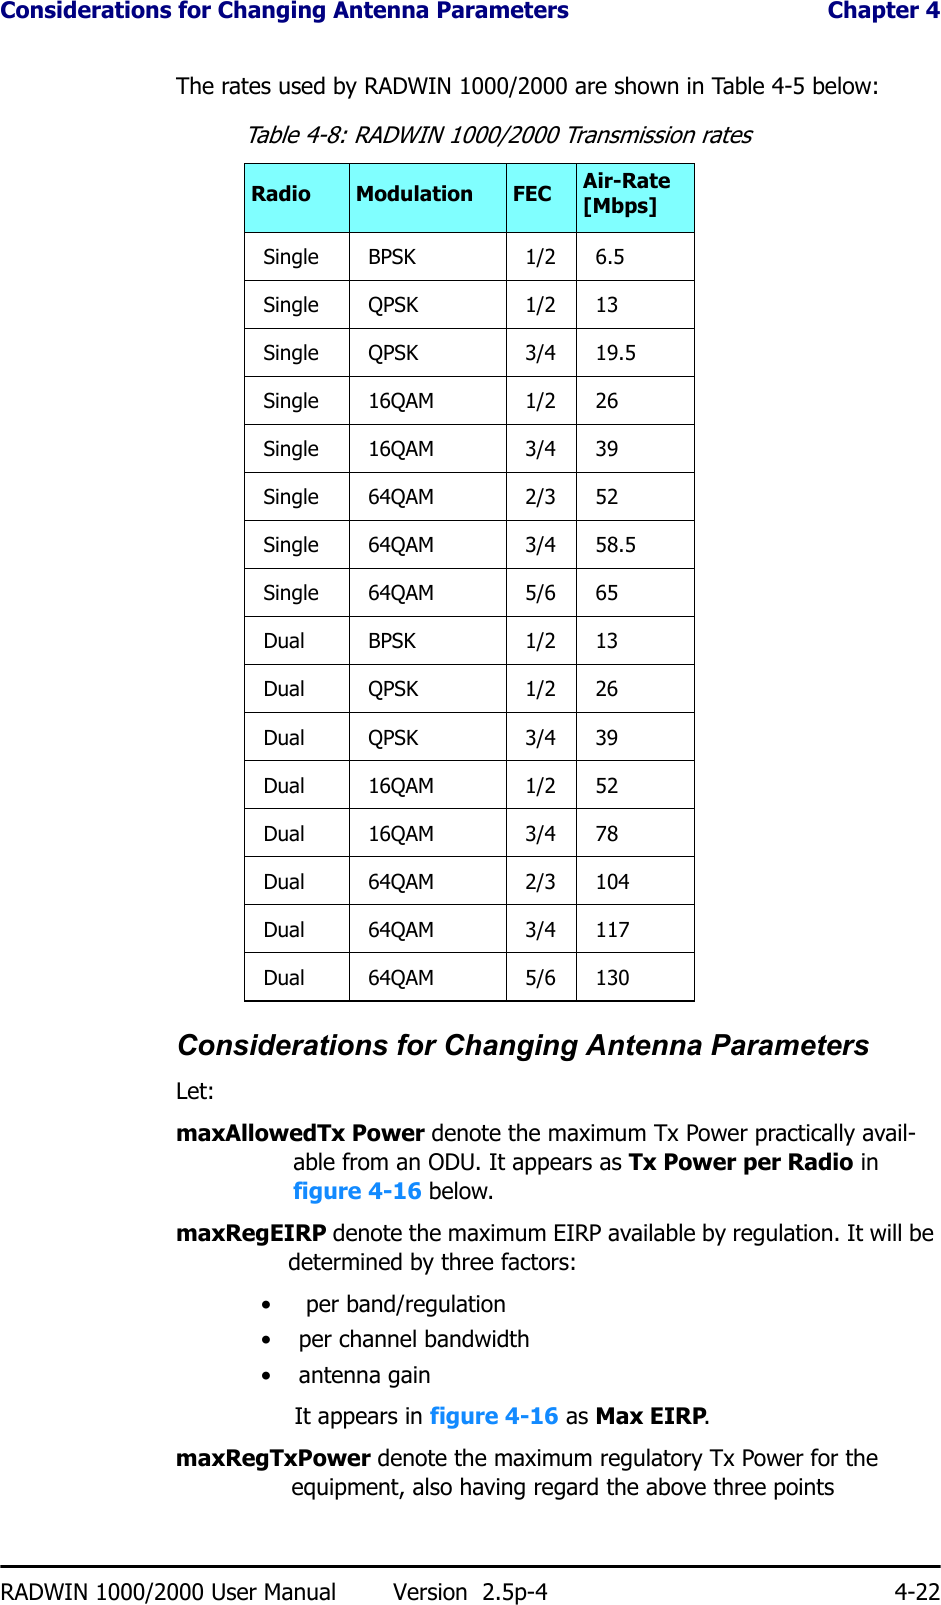 Considerations for Changing Antenna Parameters  Chapter 4RADWIN 1000/2000 User Manual Version  2.5p-4 4-22The rates used by RADWIN 1000/2000 are shown in Table 4-5 below:Considerations for Changing Antenna ParametersLet:maxAllowedTx Power denote the maximum Tx Power practically avail-able from an ODU. It appears as Tx Power per Radio in figure 4-16 below.maxRegEIRP denote the maximum EIRP available by regulation. It will be determined by three factors:•  per band/regulation• per channel bandwidth•antenna gainIt appears in figure 4-16 as Max EIRP.maxRegTxPower denote the maximum regulatory Tx Power for the equipment, also having regard the above three pointsTable 4-8: RADWIN 1000/2000 Transmission ratesRadio Modulation FEC Air-Rate [Mbps]Single BPSK 1/2 6.5Single QPSK 1/2 13Single QPSK 3/4 19.5Single 16QAM 1/2 26Single 16QAM 3/4 39Single 64QAM 2/3 52Single 64QAM 3/4 58.5Single 64QAM 5/6 65Dual BPSK 1/2 13Dual QPSK 1/2 26Dual QPSK 3/4 39Dual 16QAM 1/2 52Dual 16QAM 3/4 78Dual 64QAM 2/3 104Dual 64QAM 3/4 117Dual 64QAM 5/6 130